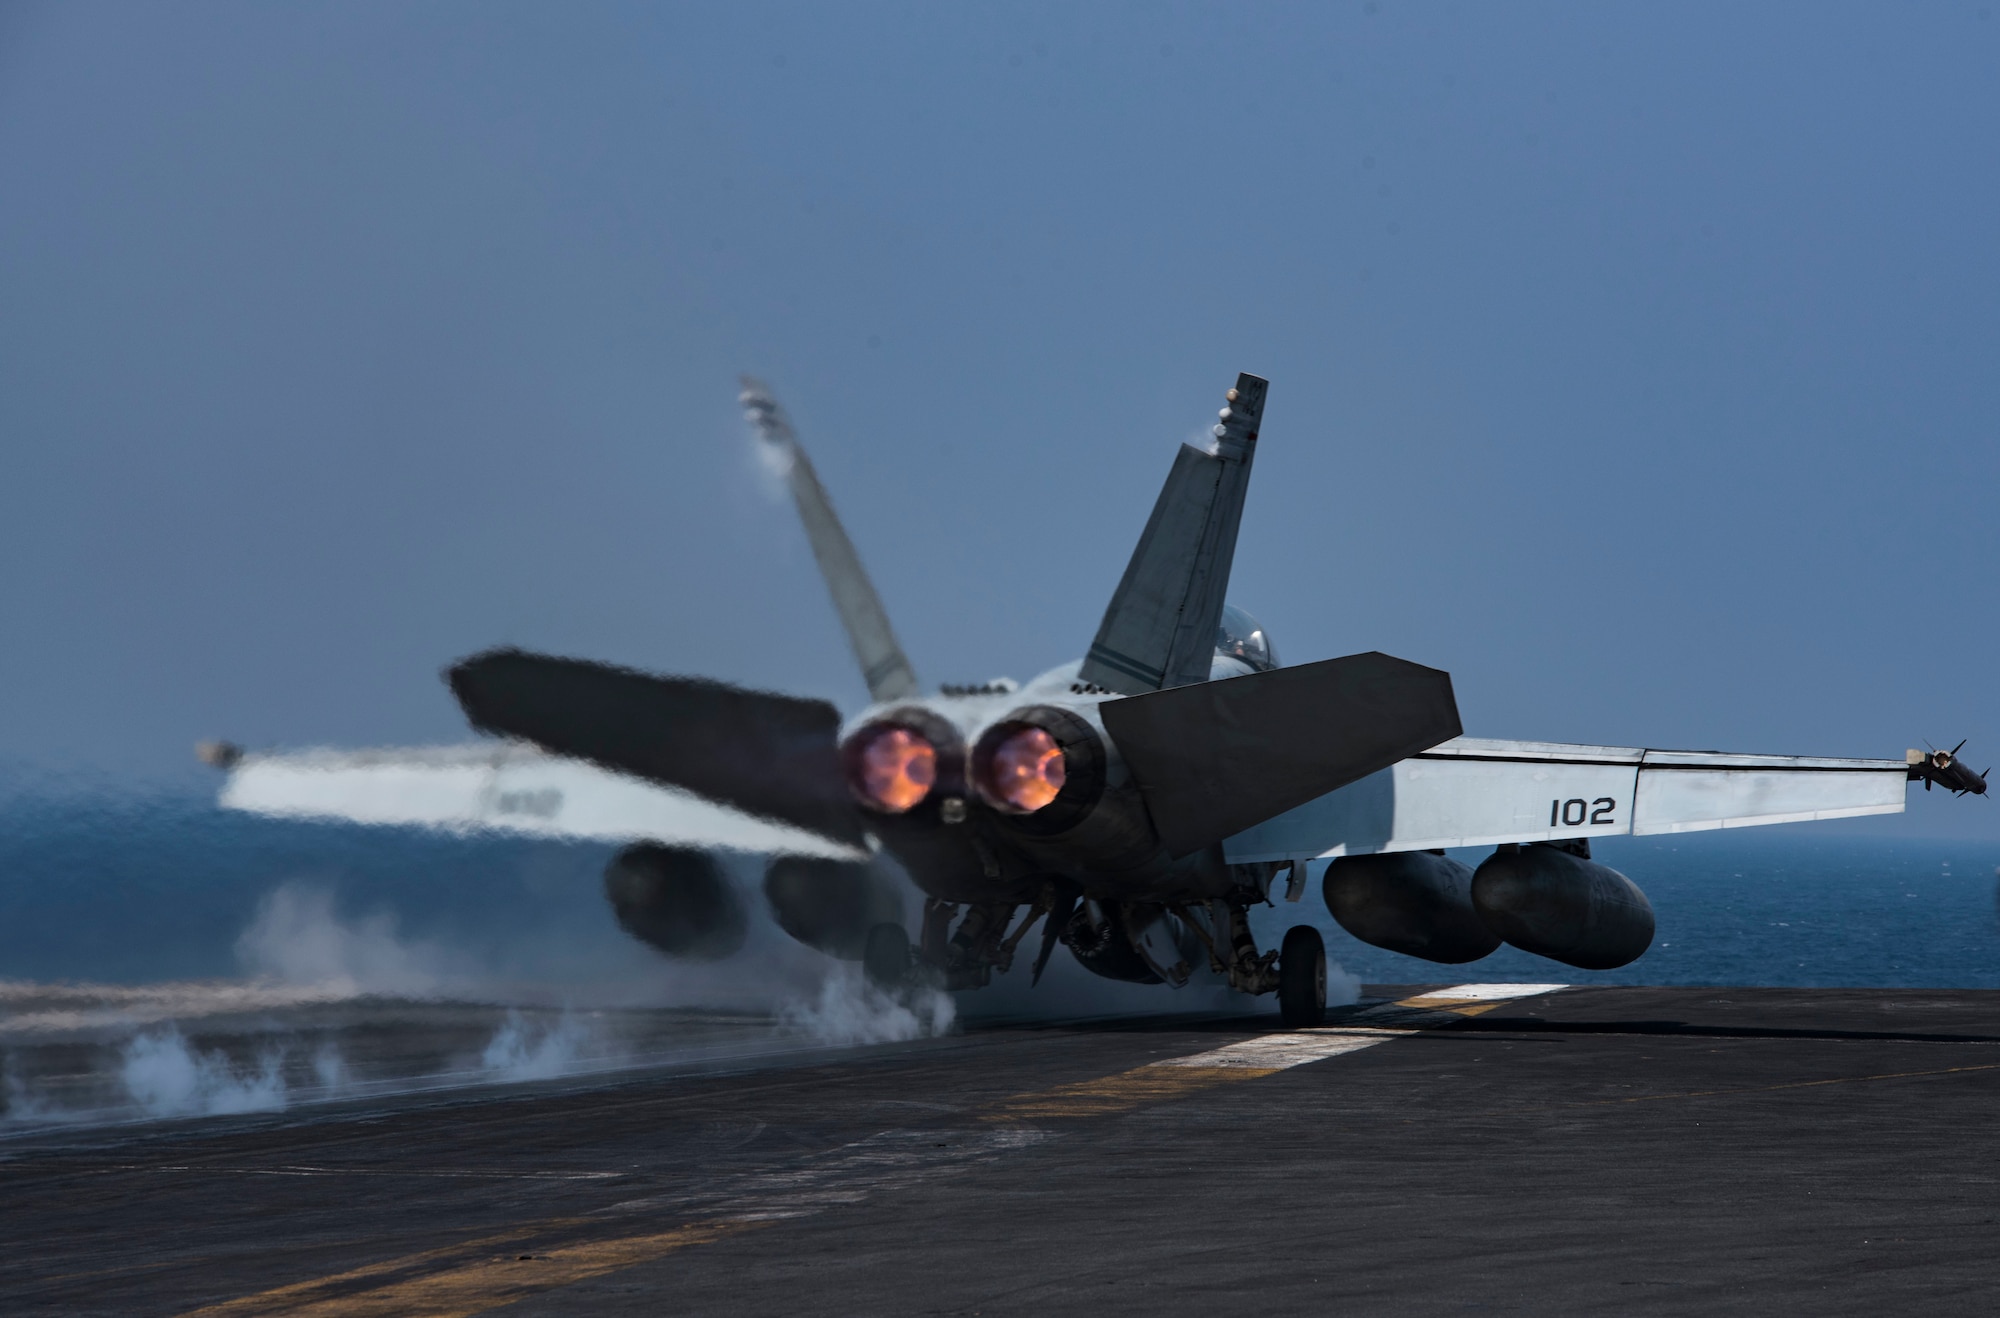 An F/A-18F Super Hornet, assigned to Strike Fighter Squadron (VFA) 32, launches from the flight deck of the aircraft carrier USS Dwight D. Eisenhower (CVN 69) (Ike). Ike and its carrier strike group are deployed in support of Operation Inherent Resolve, maritime security operations and theater security cooperation efforts in the U.S. 5th Fleet area of operations. (U.S. Navy photo/Petty Officer 3rd Class Nathan T. Beard)